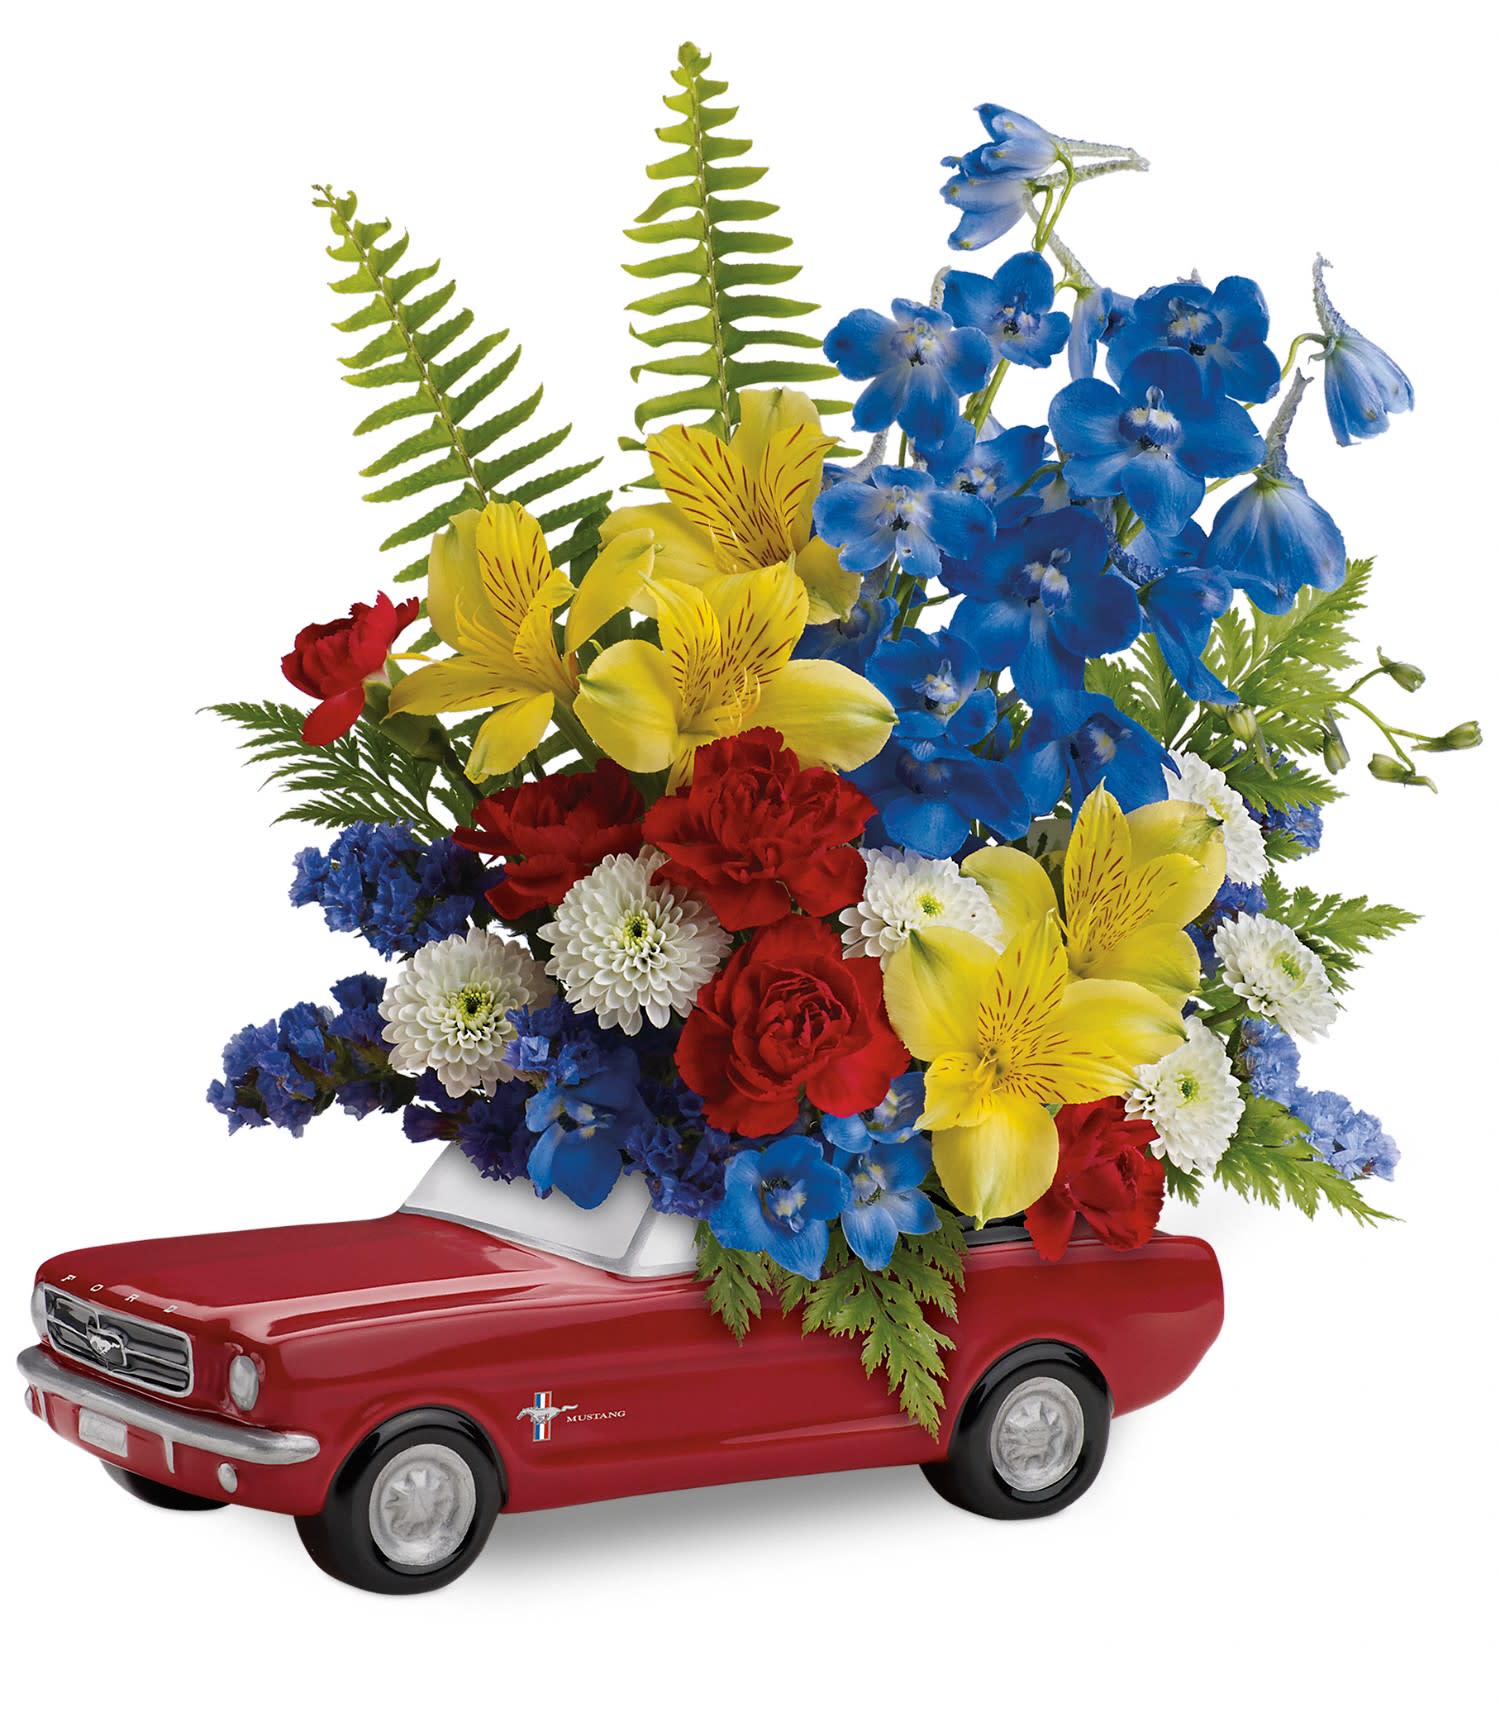 Ford Mustang - Vroom, vroom! Get his motor running this Father's Day with a freewheelin' gift he'll never forget - a bold bouquet of alstroemeria, carnations and mums, hand-delivered in a '65 Ford Mustang convertible keepsake. Hand-painted in classic poppy red, this ceramic collectible is one-of-a-kind, just like Dad.